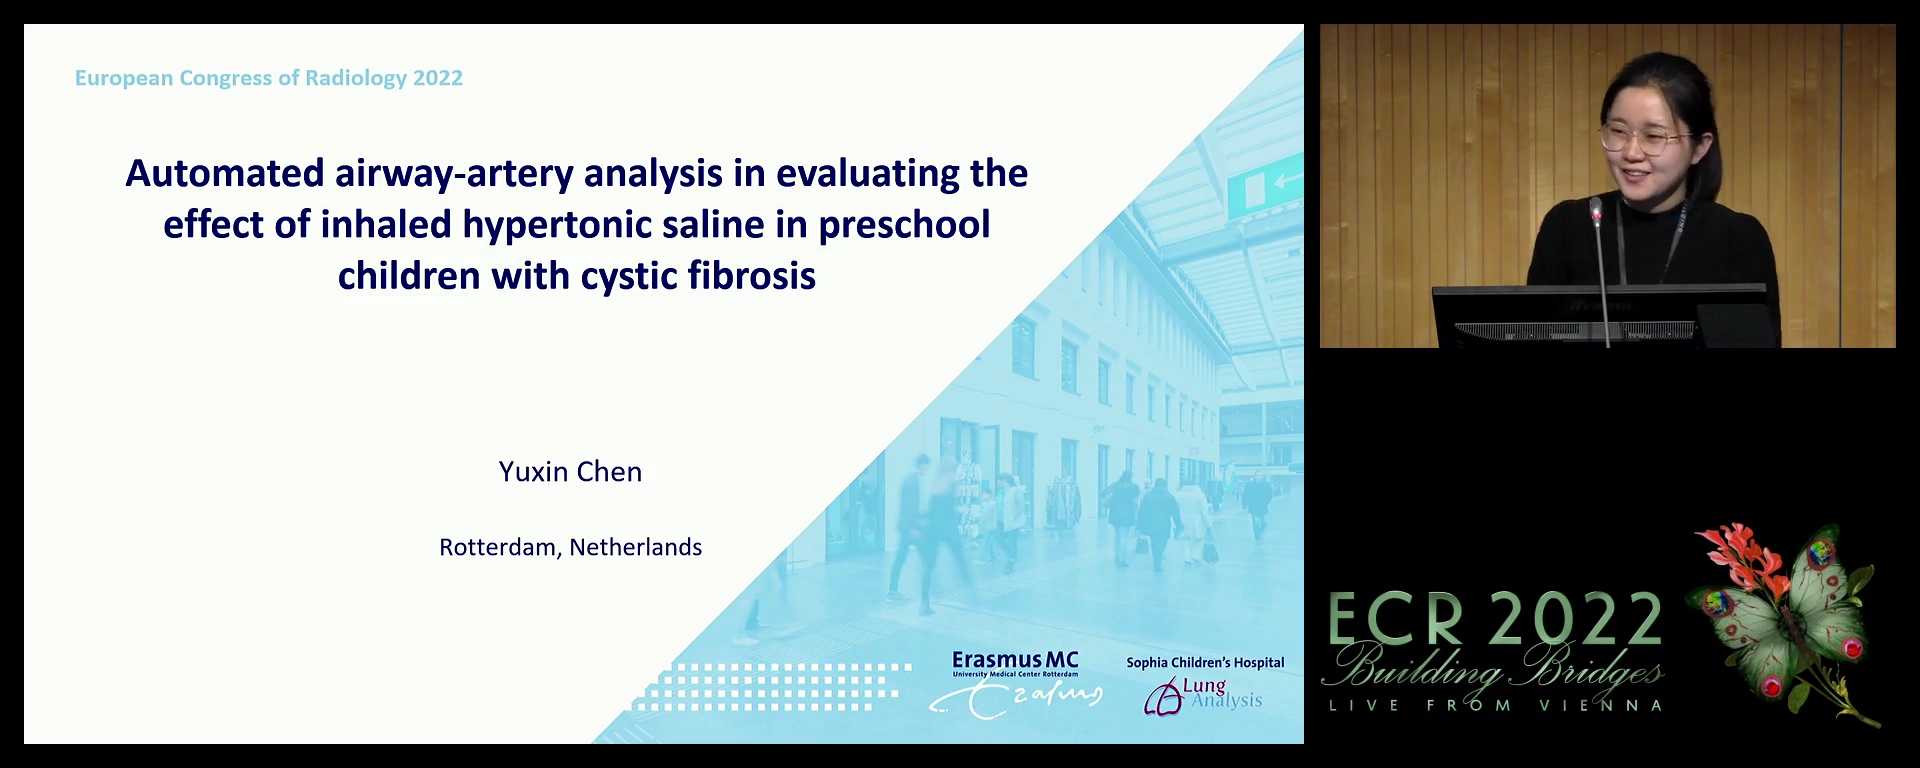 Automated airway-artery analysis in evaluating the effect of inhaled hypertonic saline in preschool children with cystic fibrosis - Yuxin Chen, Rotterdam / NL